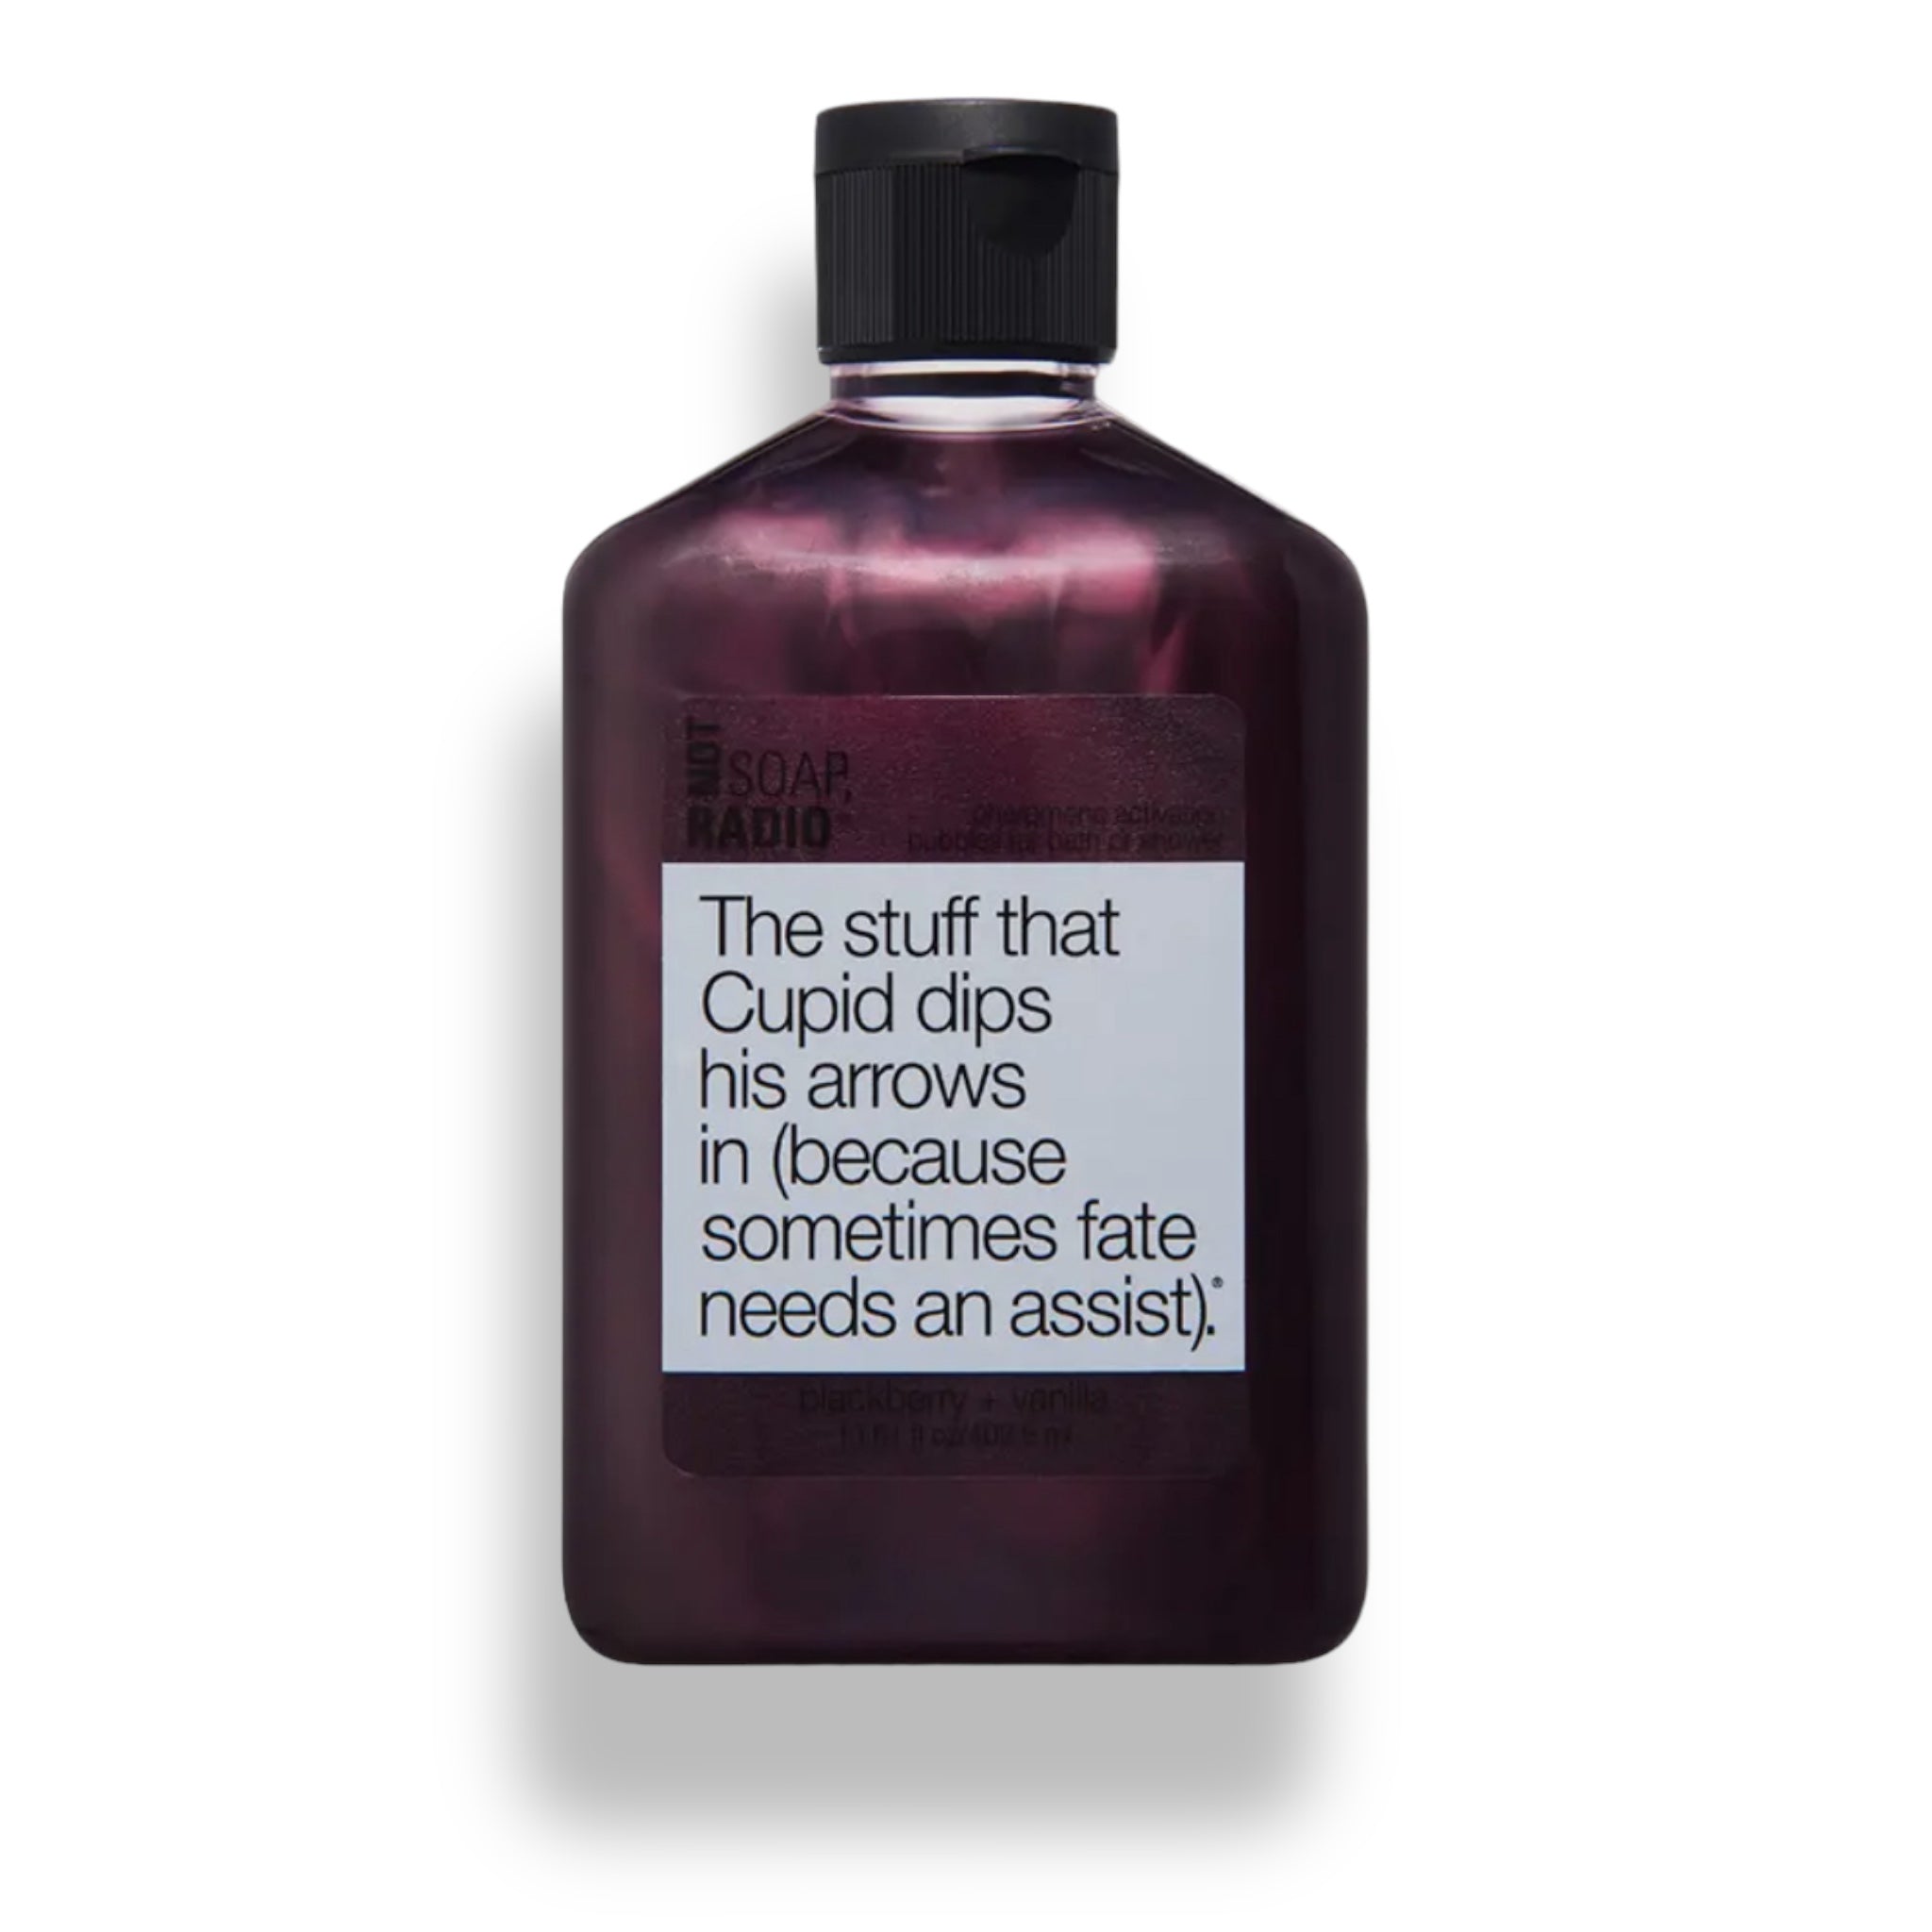 The Stuff that Cupid Dips His Arrows In BATH & SHOWER GEL  Not Soap, Radio